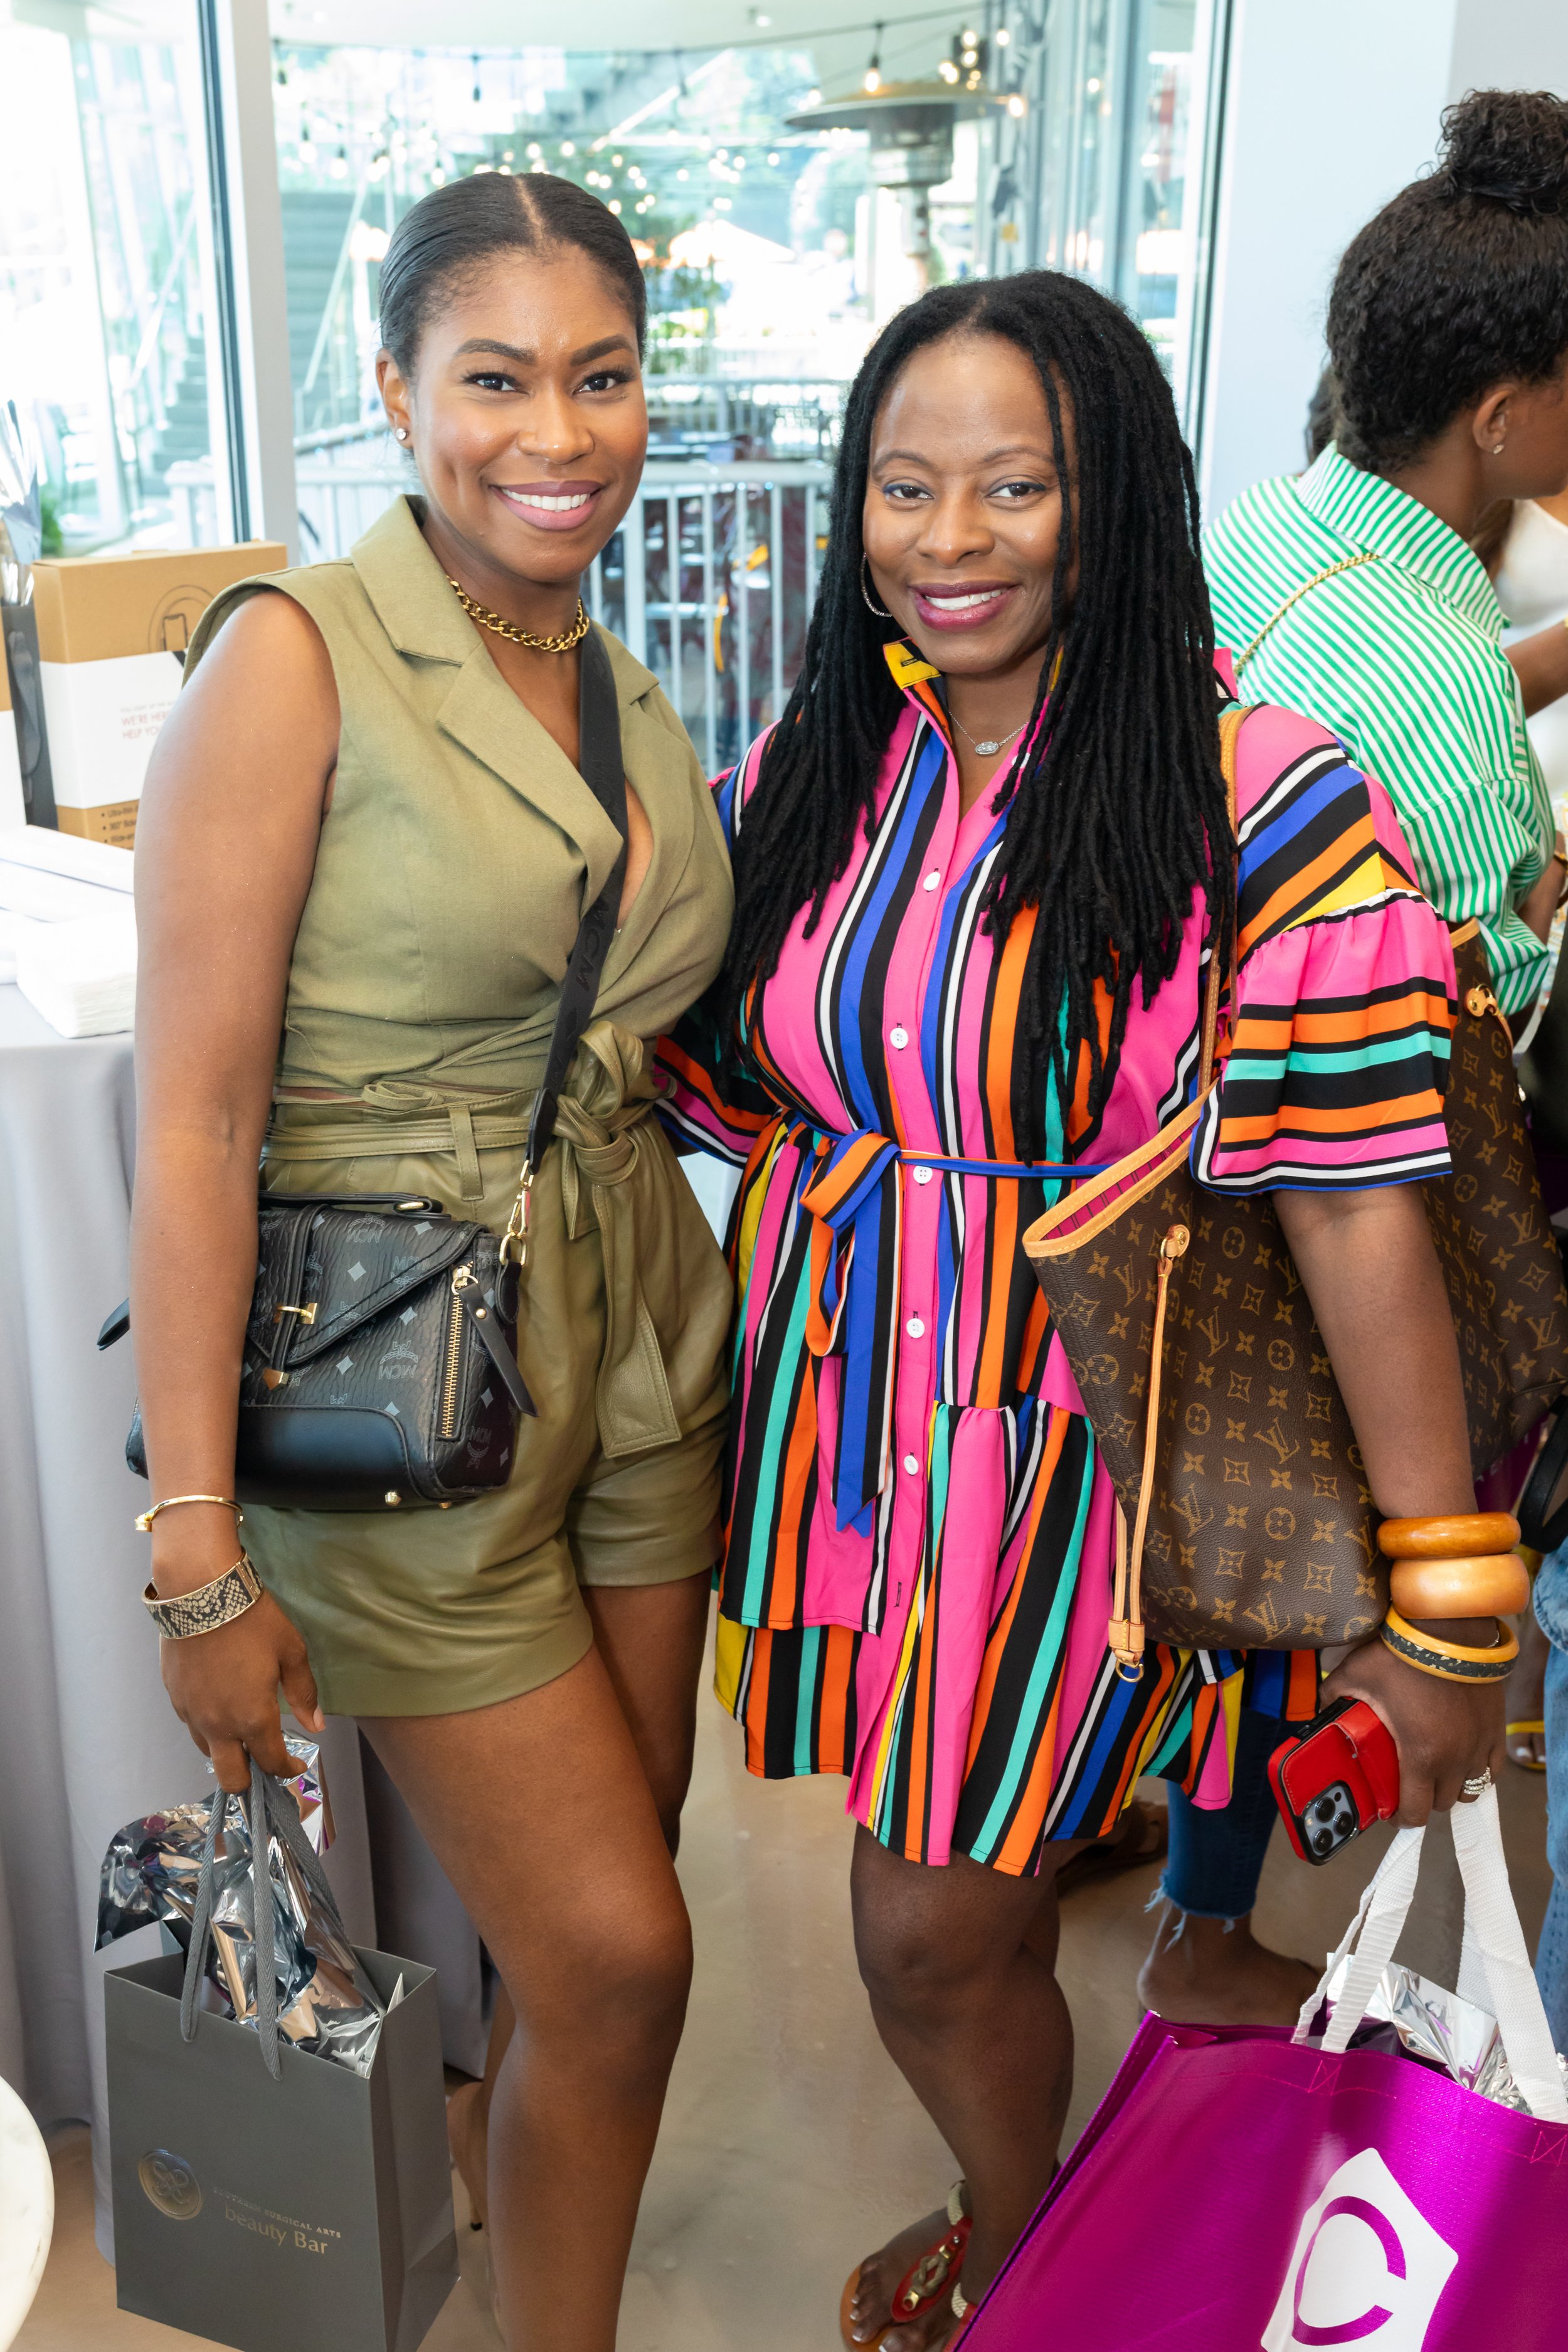 20230817-The Luxe List Atlanta-Southern Surgical Arts Beauty Bar Grand Opening-THU-BC-099.jpg (Copy)